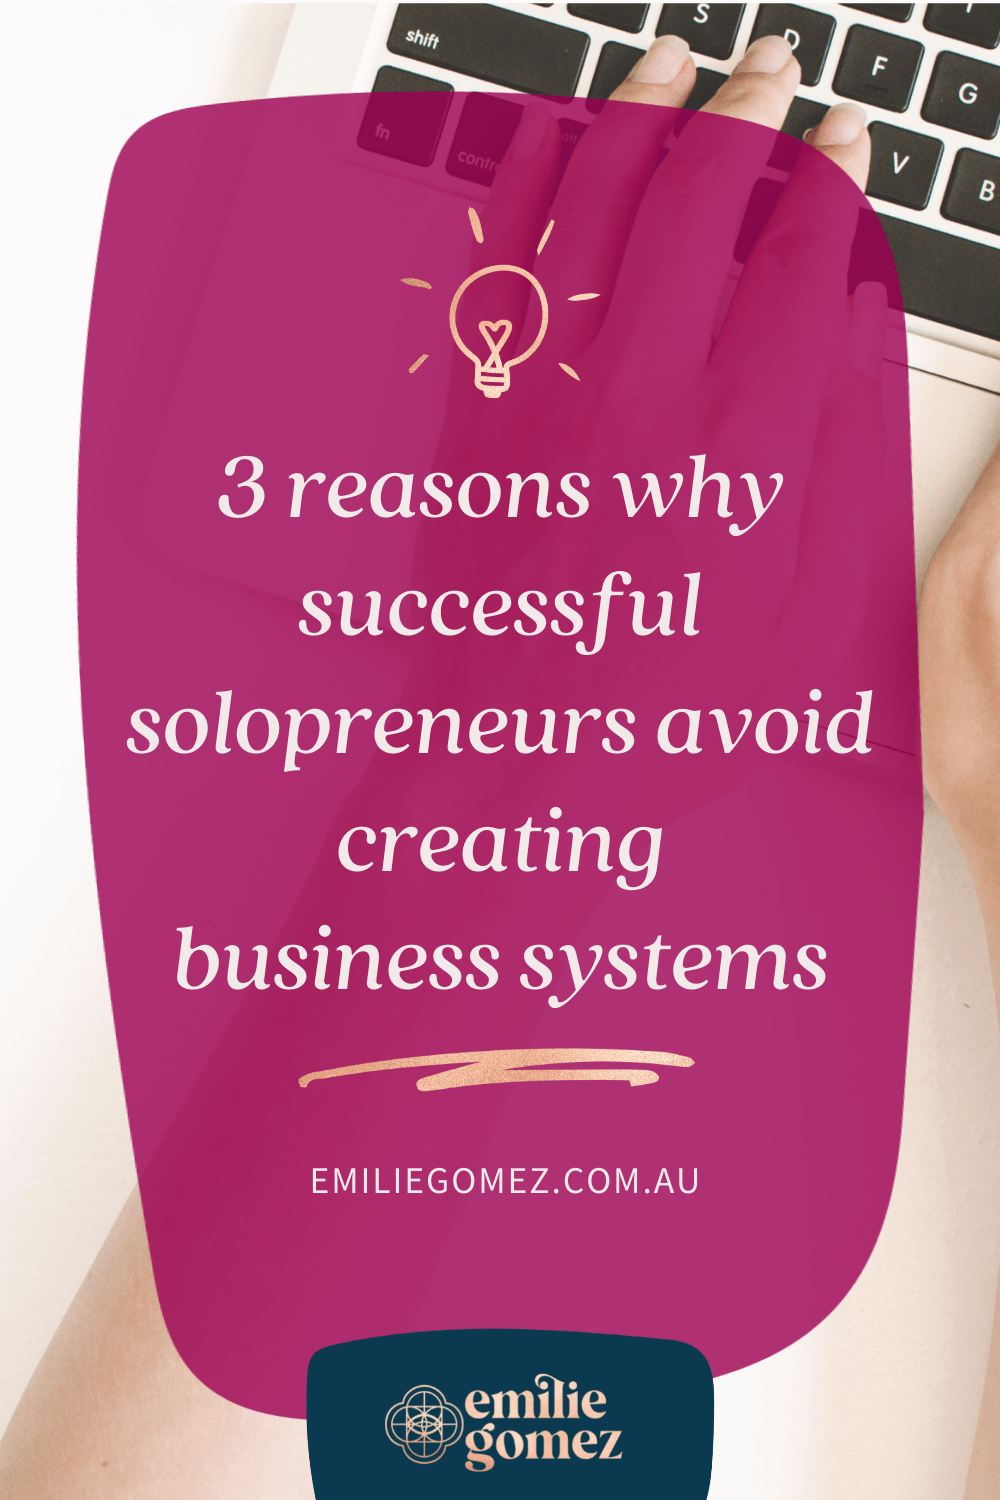 Are you a successful solopreneur but your business systems are the last thing you want to think about? You know that they could be better but something keeps holding you back from truly getting your business systems & processes organised. As a systems strategist, I see this a lot so I'm sharing the top 3 reasons why successful entrepreneurs avoid creating business systems. Click through to see what's holding you back from setting up the best business systems & processes for your online business.